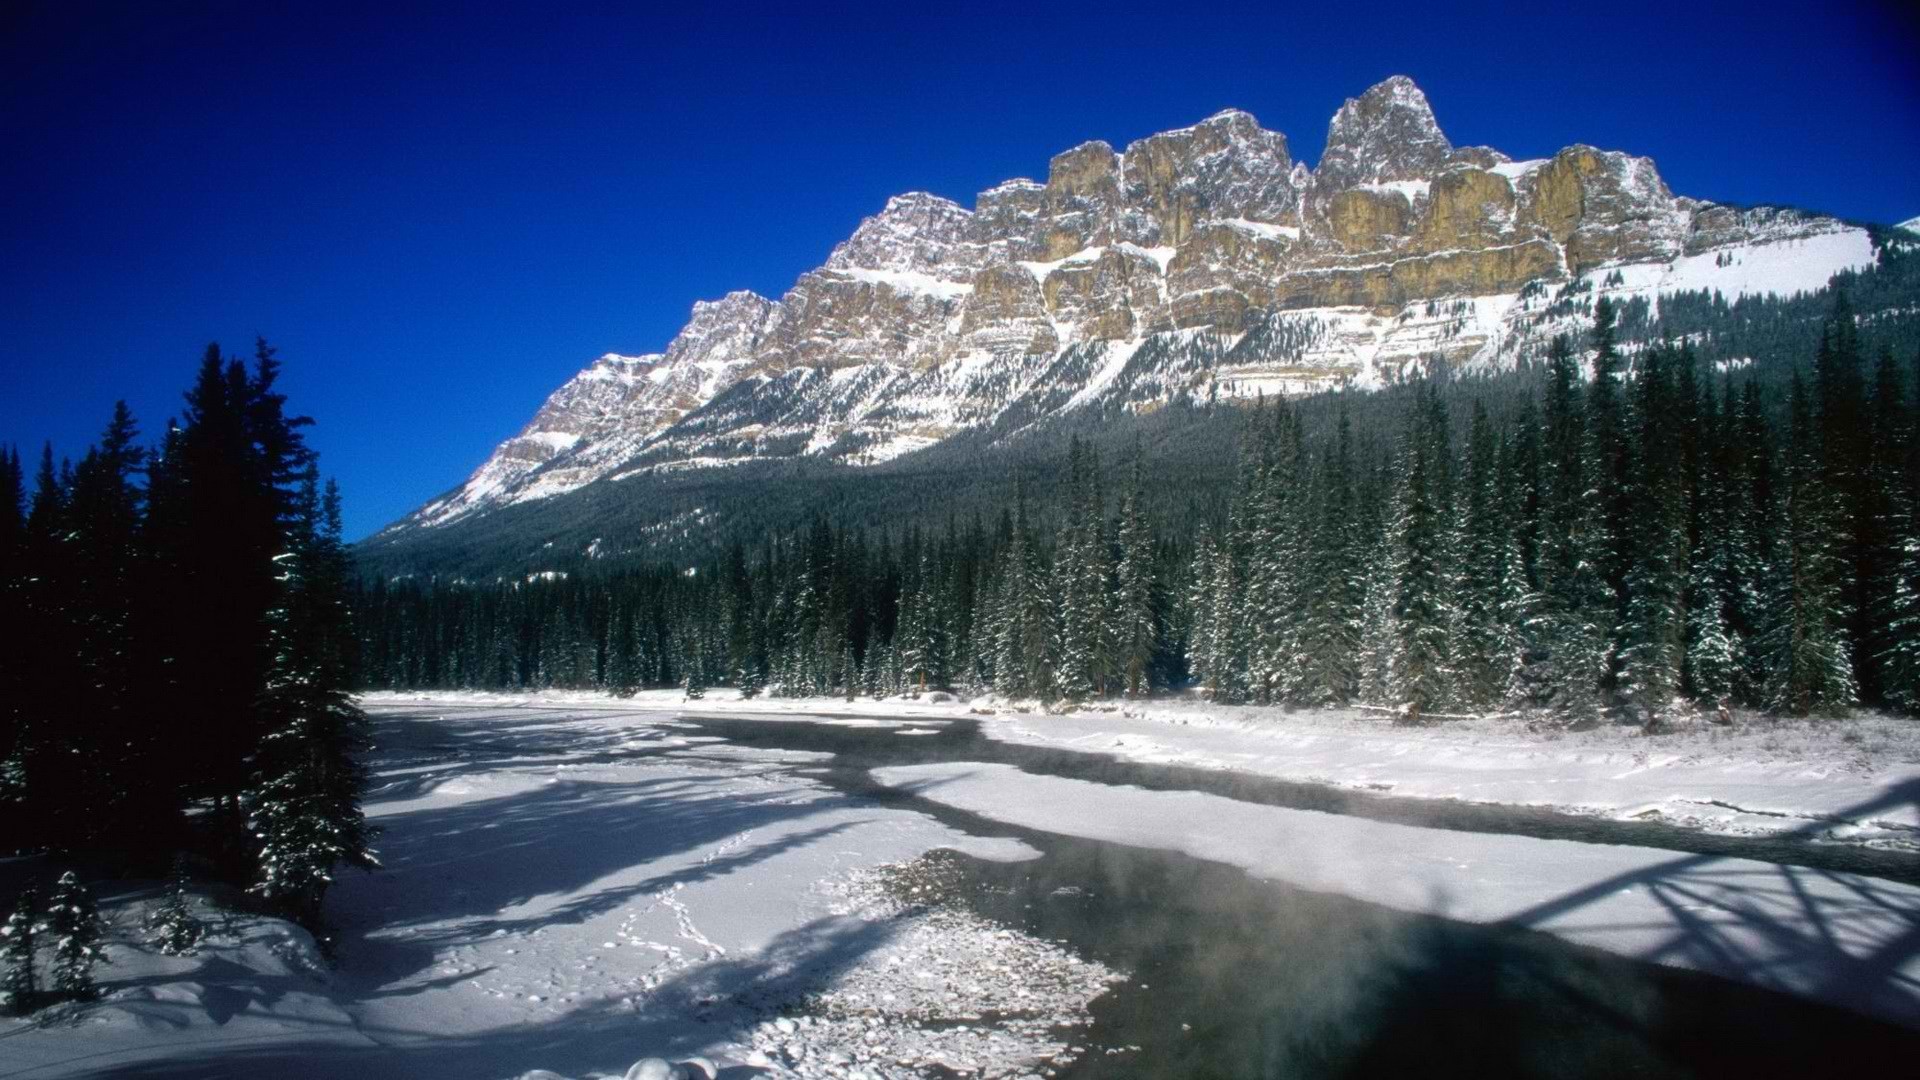 370 Canada HD Wallpapers [1920x1080]